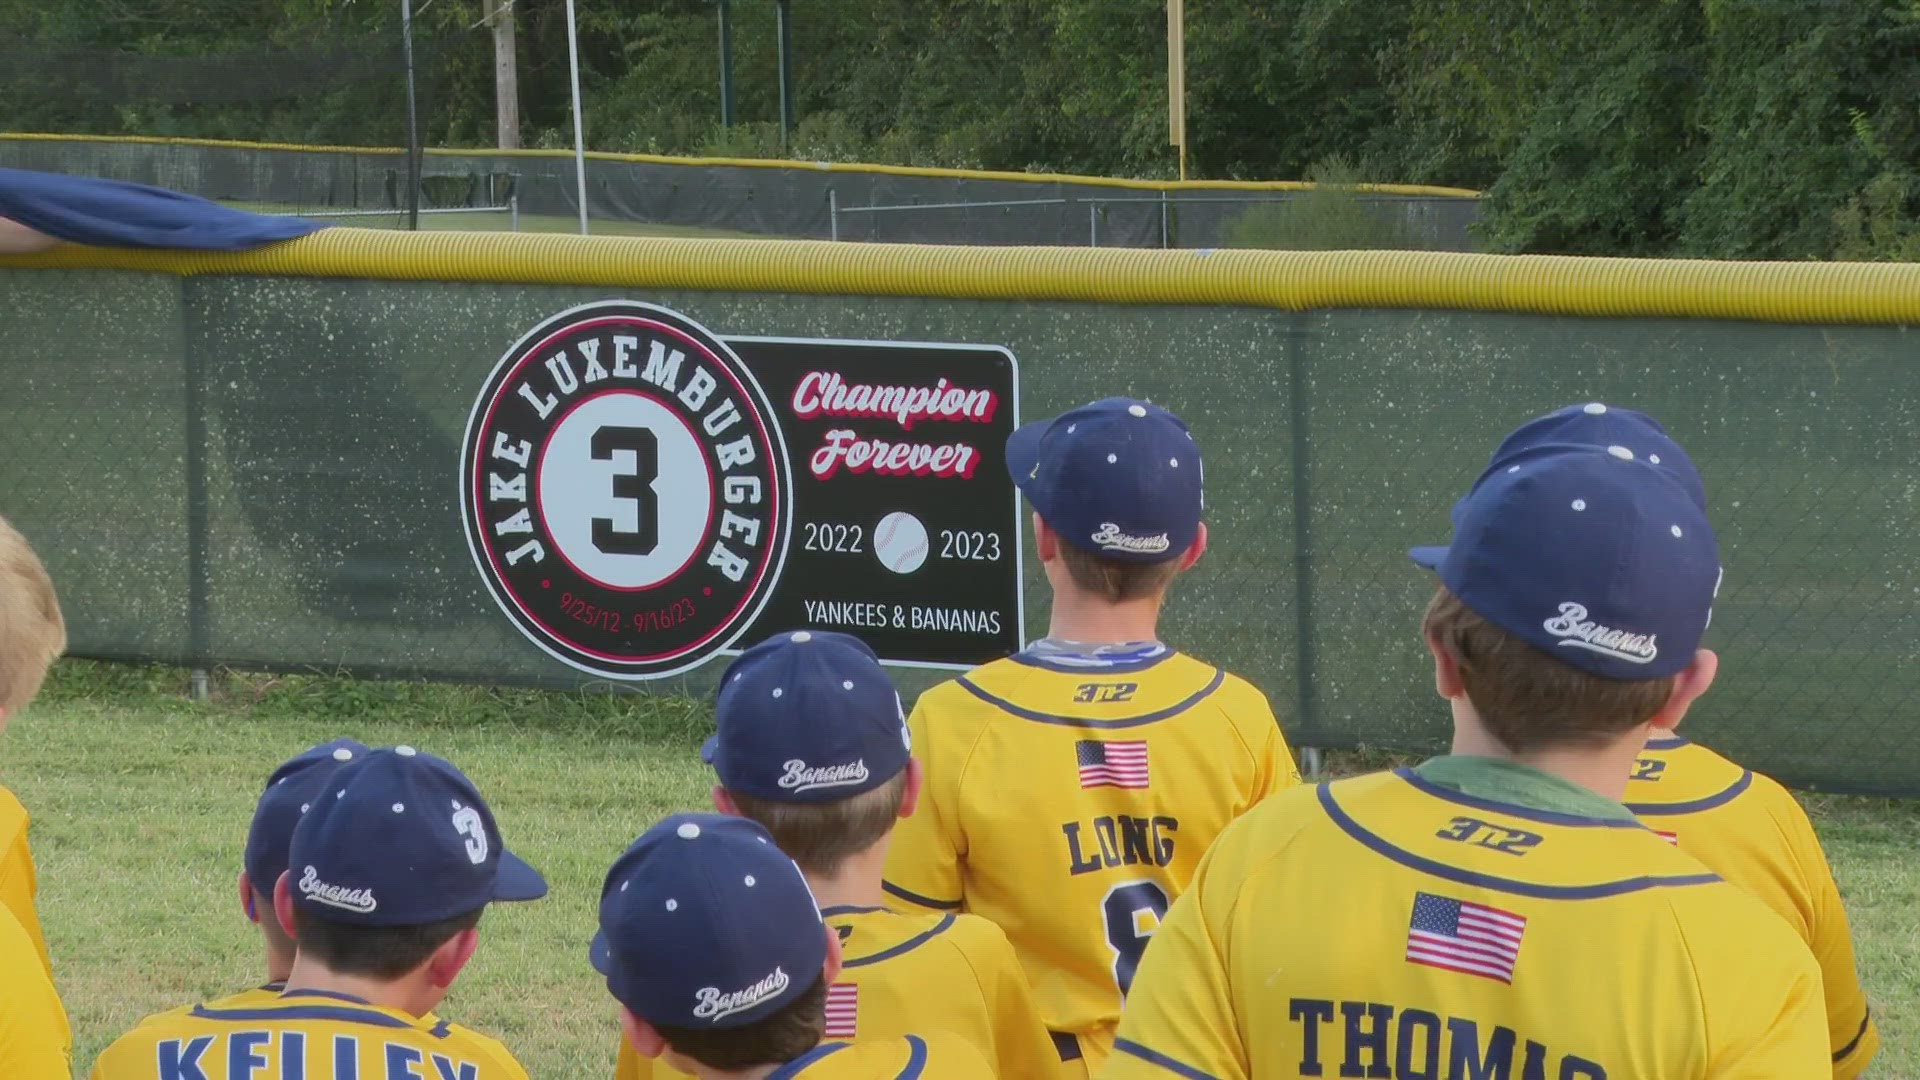 The community proudly wore #3 on their hats and jerseys for Jake Luxemburger.